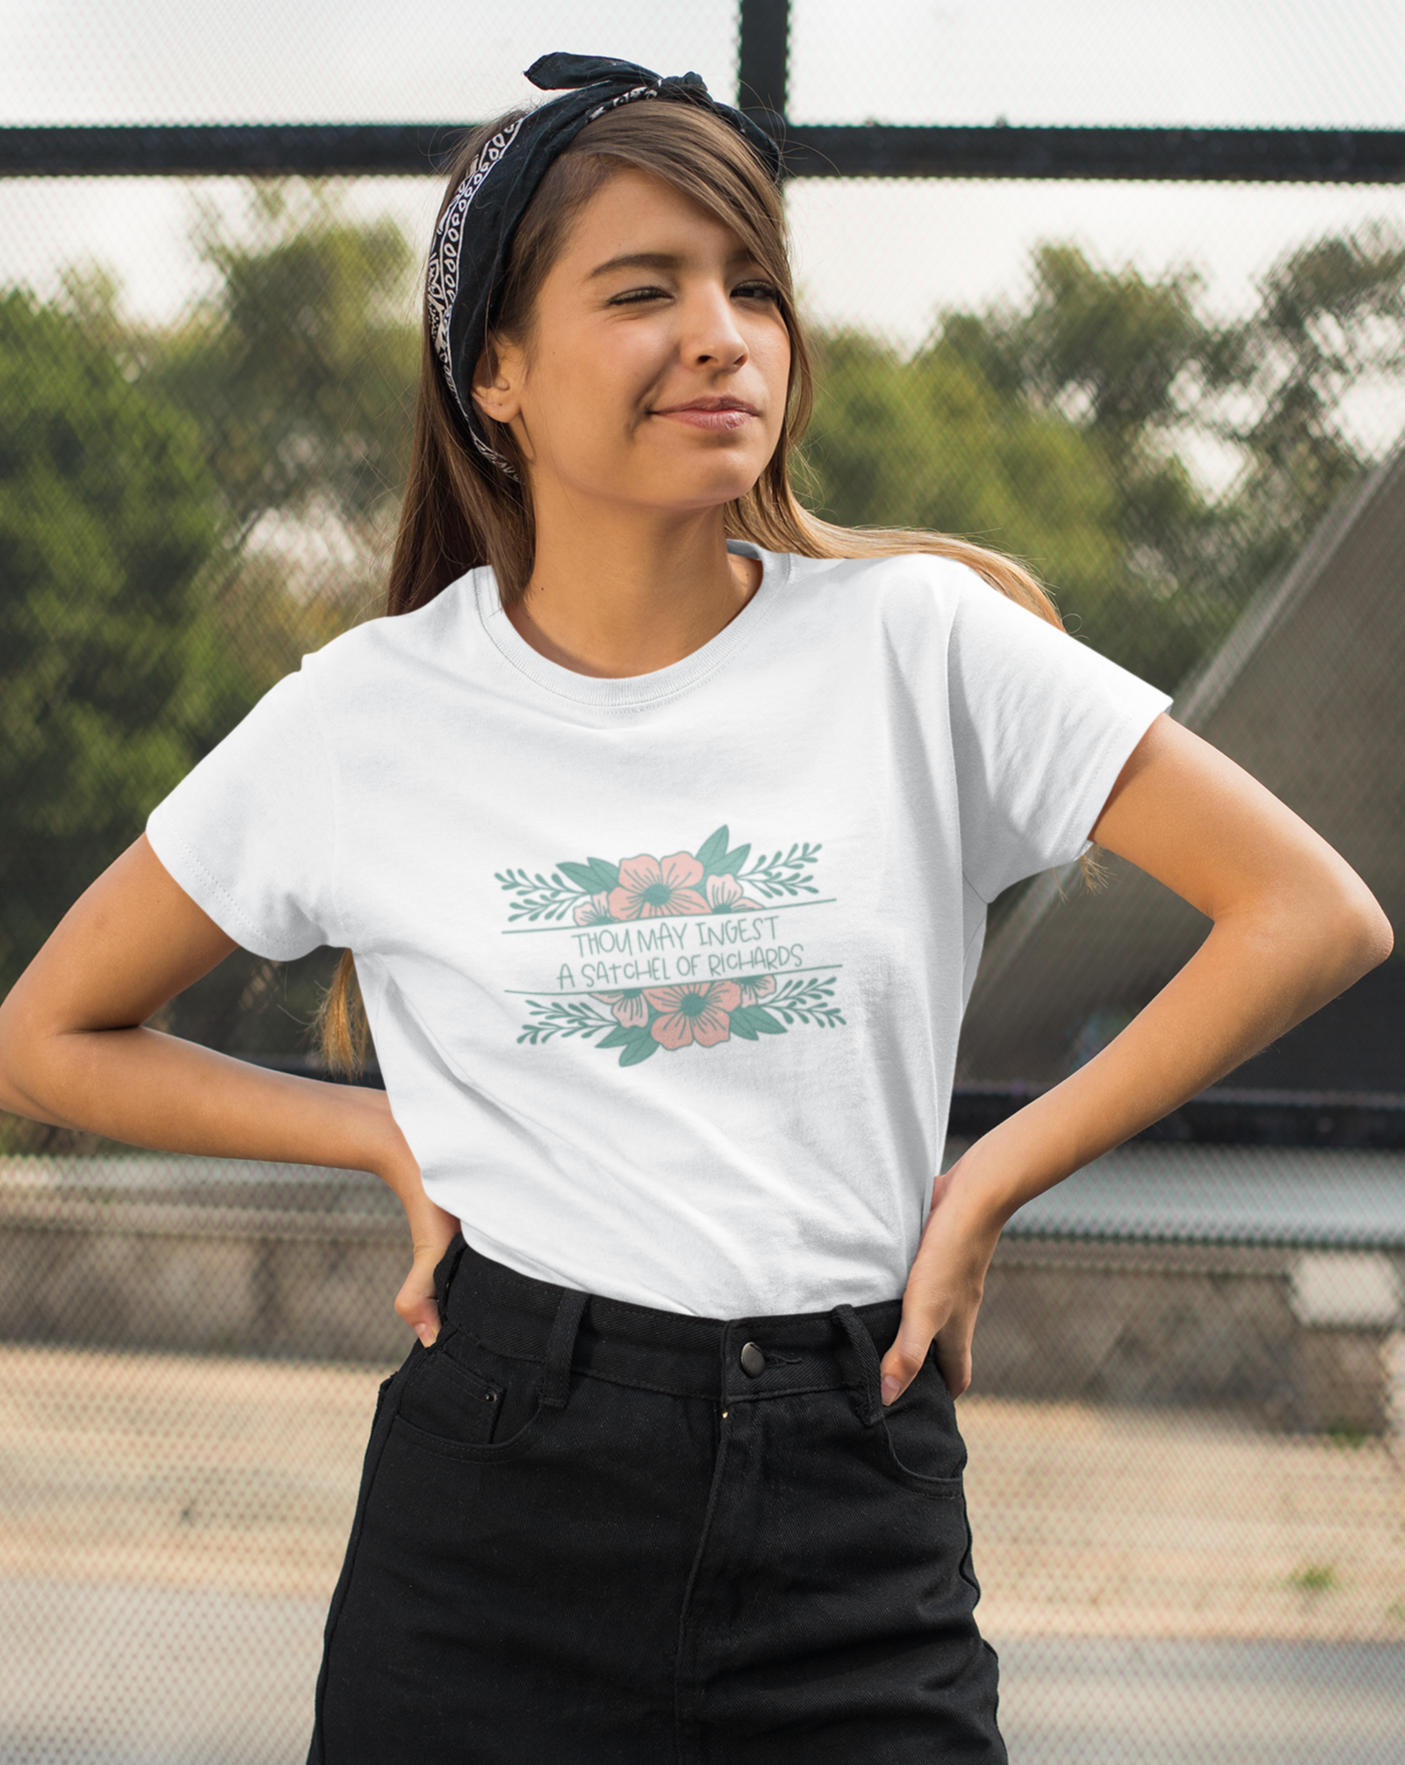 Thou may ingest a satchel of Richards. For those days when all you want to do is tell someone to eat a bag of d****, but need to be polite. This cotton t-shirt is a great way to get your point across in a not so vulgar manner. Stay classy and cool at the same time in your new favorite tee! 